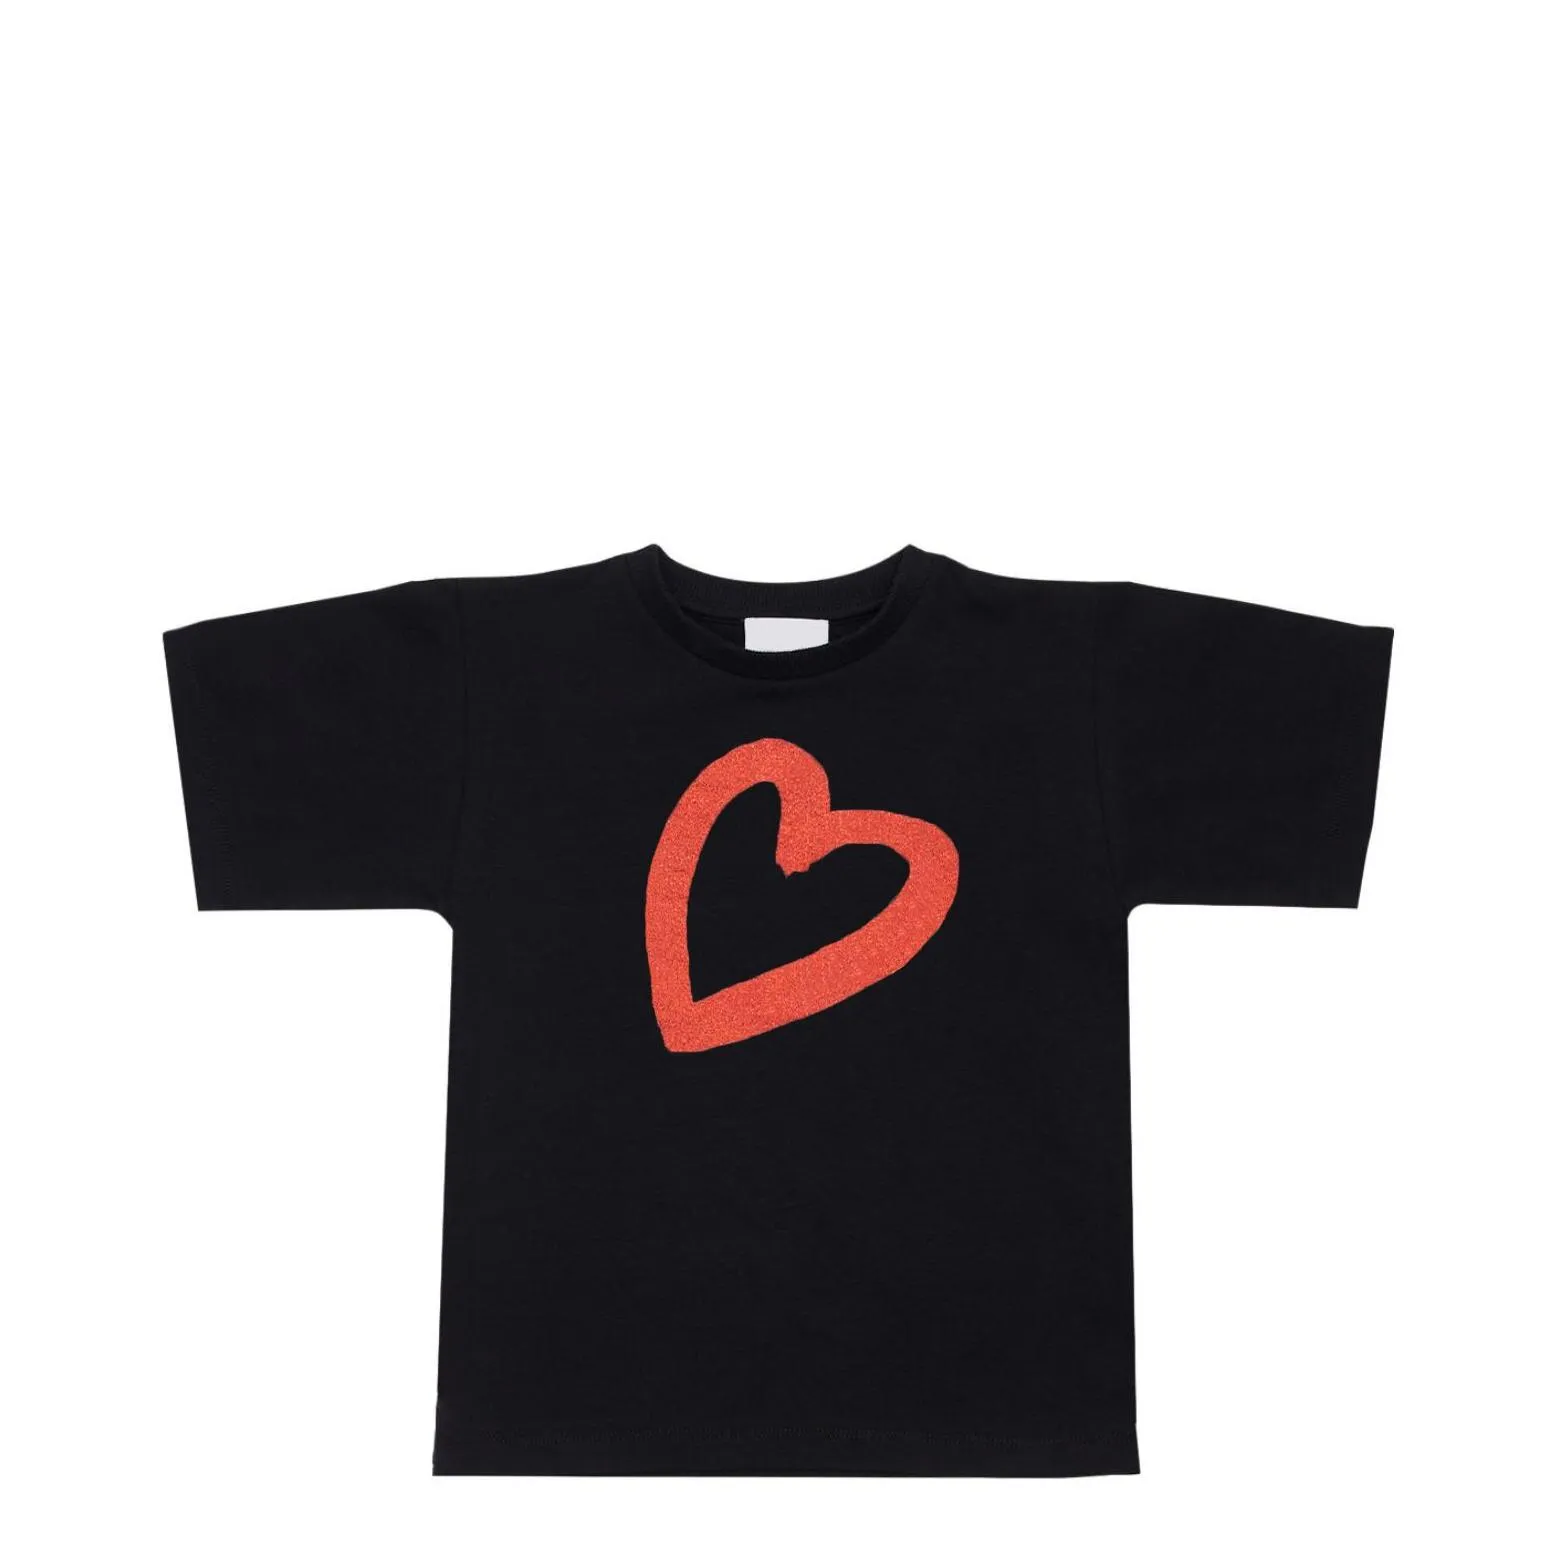 kids t shirts top tee boy girl t-shirts clothing teen baby short-sleeved heart letter tees comfortable casual cute girls tops fashion boys